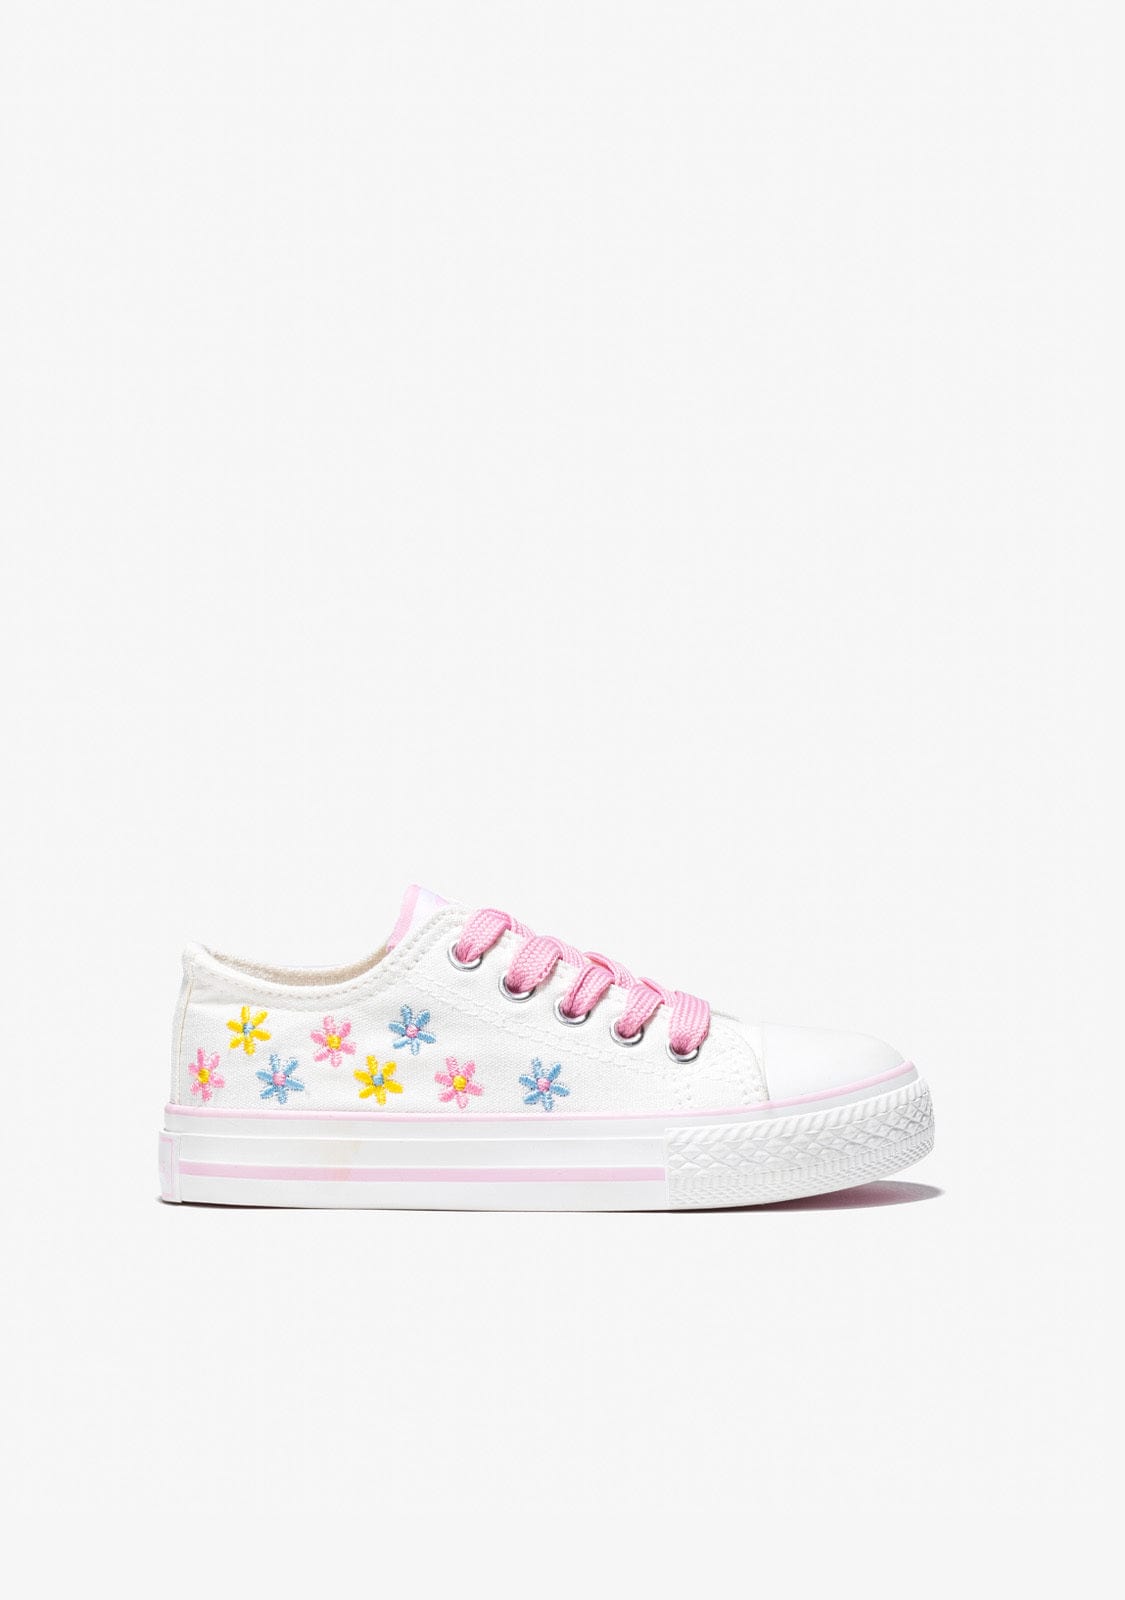 CONGUITOS Shoes Girl's White Flowers Sneakers Canvas